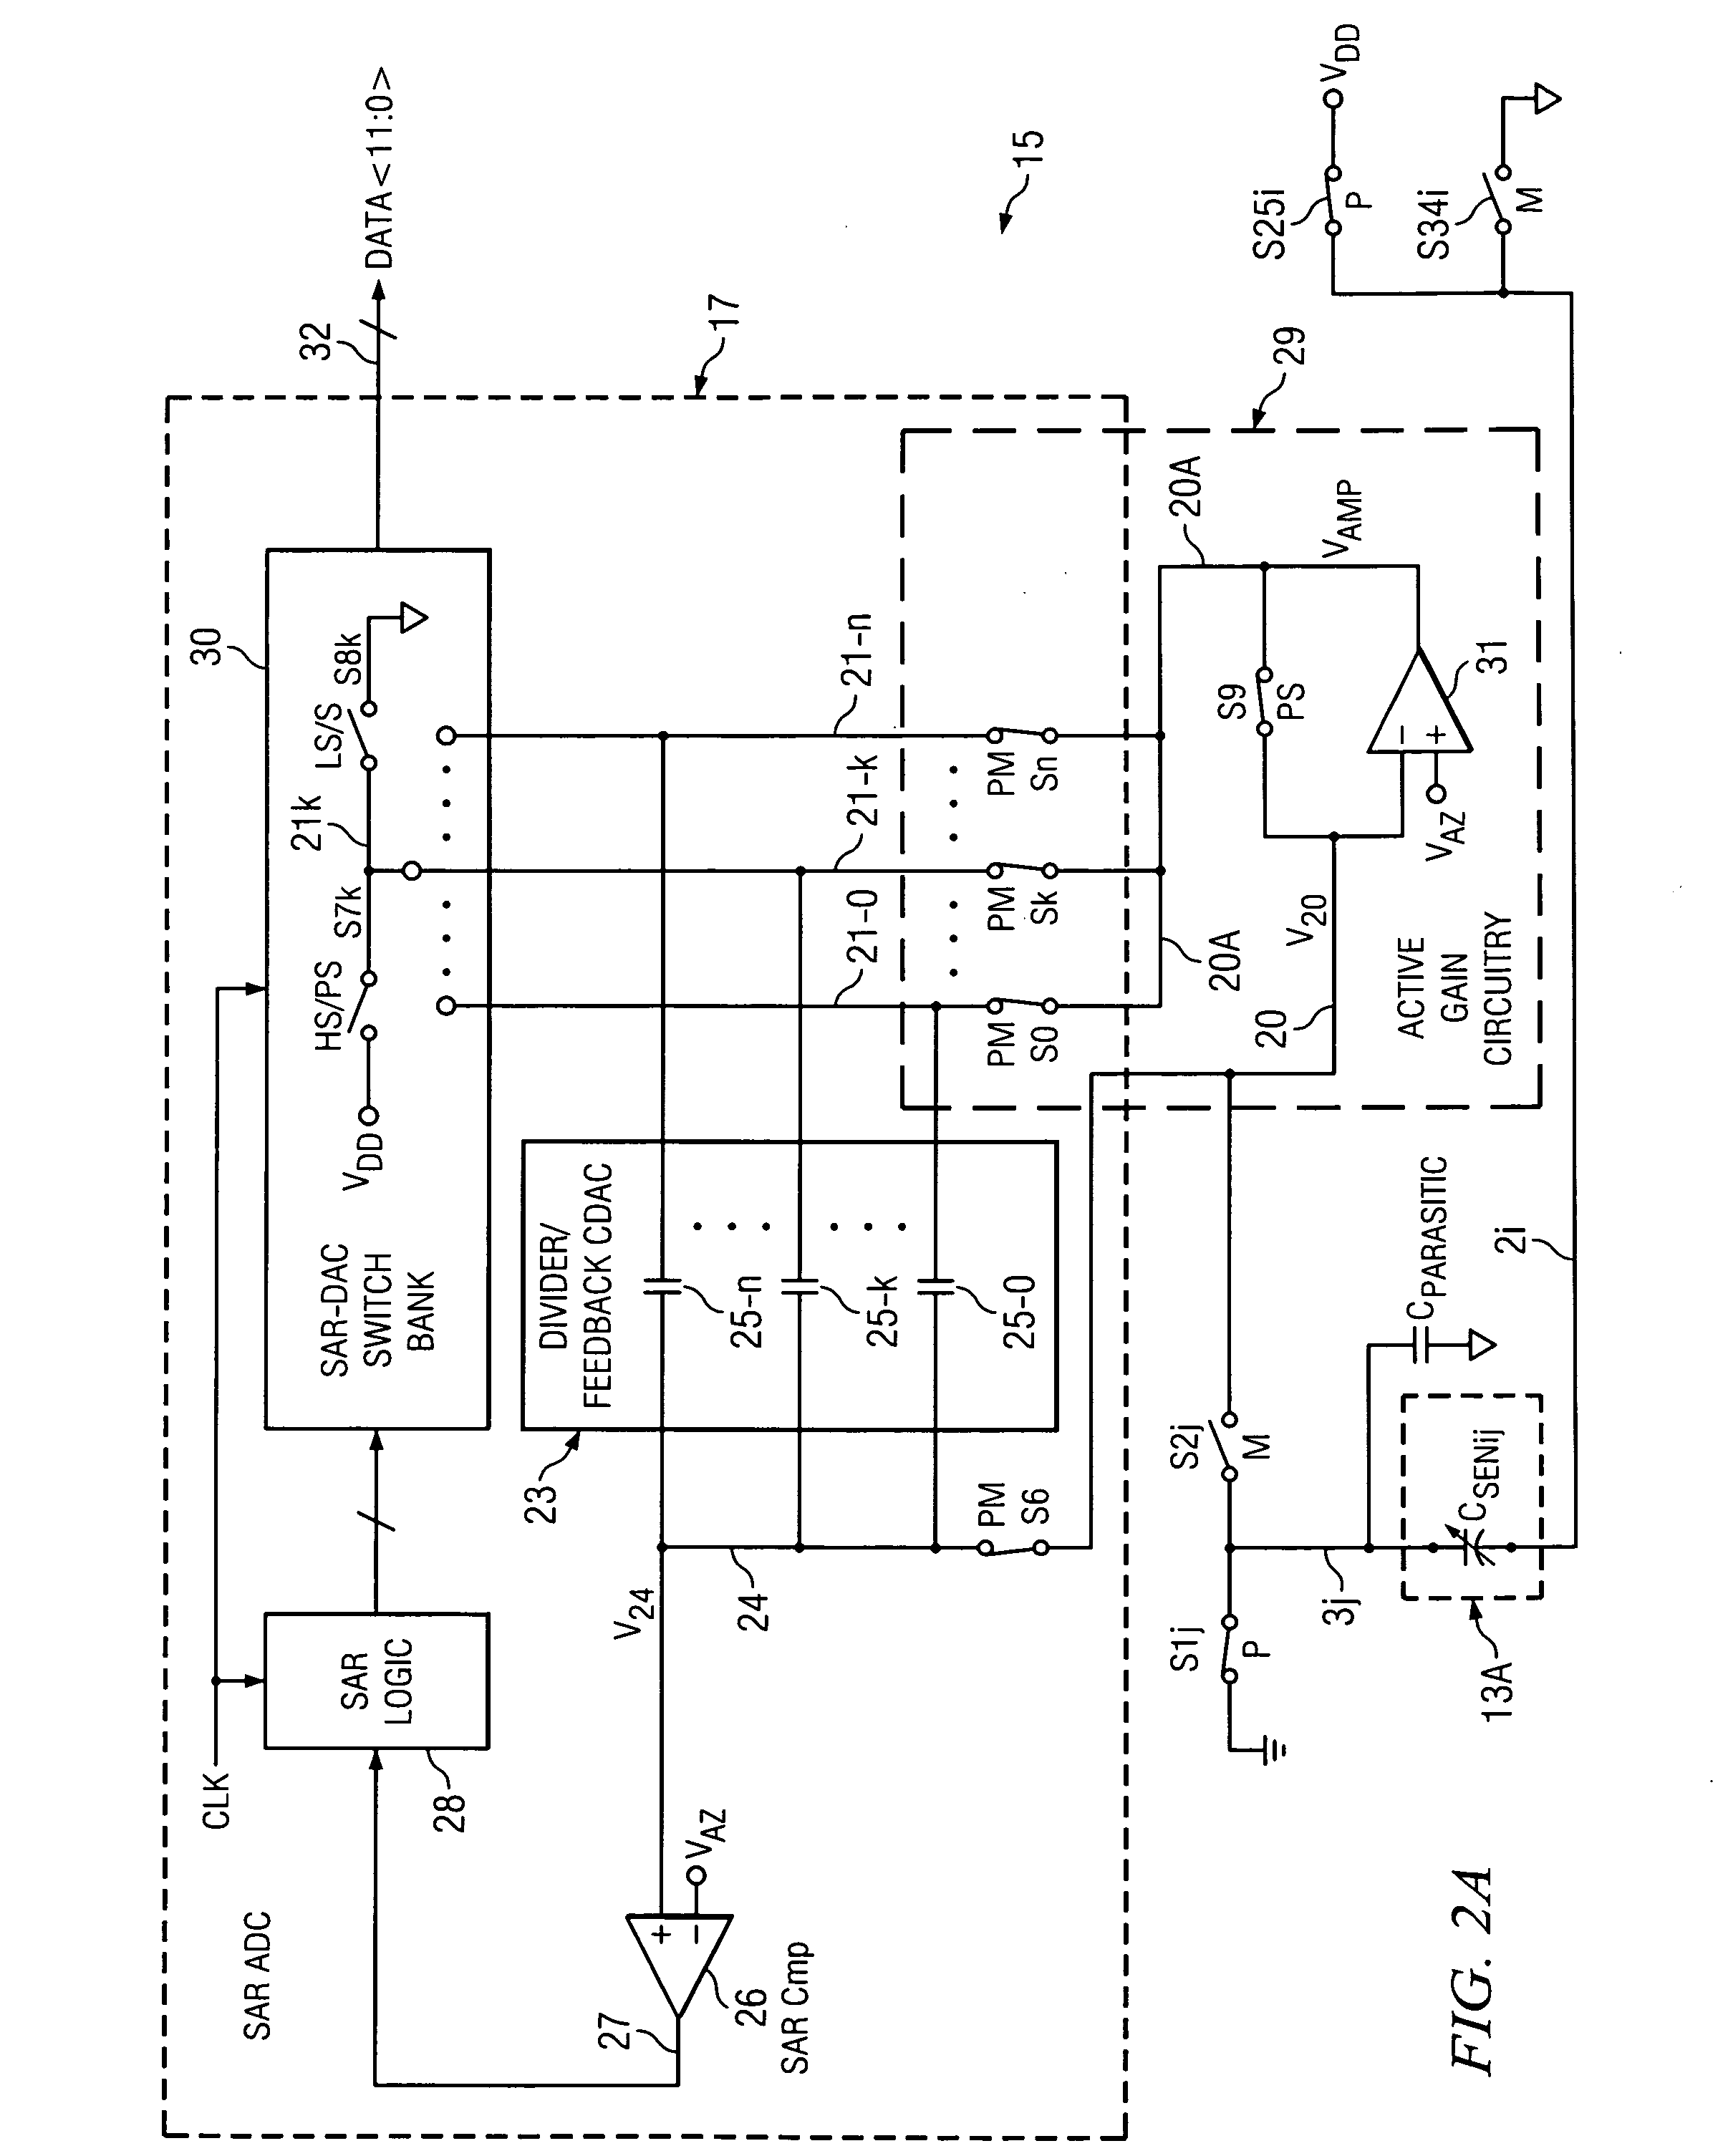 Deconvolution-based capacitive touch detection circuit and method